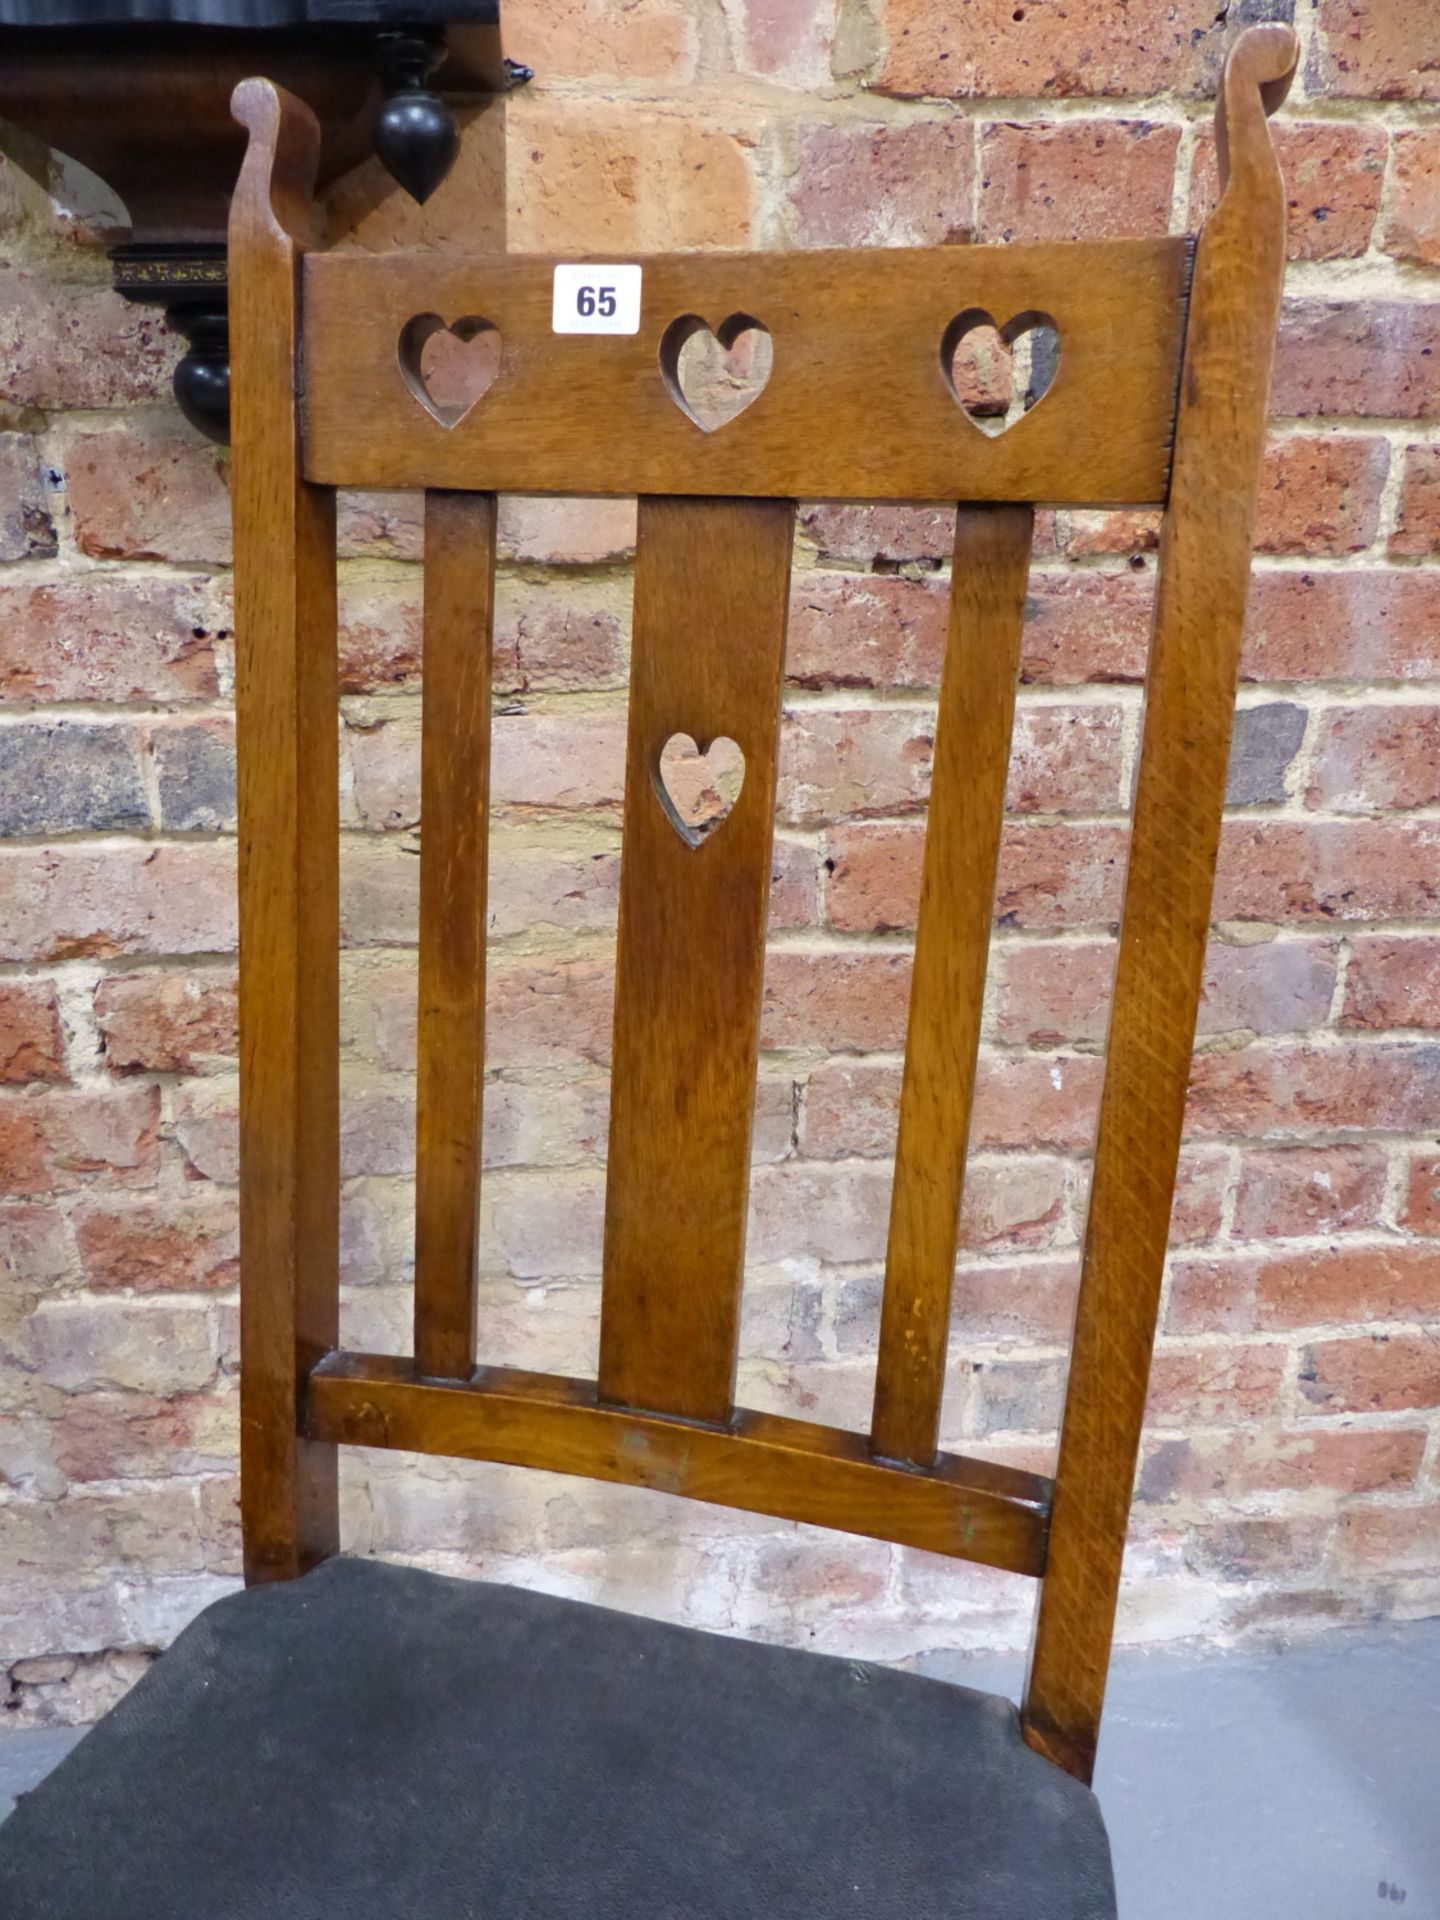 A PAIR OF EARLY 20th CENTURY ARTS AND CRAFTS STYLE OAK DINING CHAIRS WITH PIERCED HEART BACKS AND - Image 2 of 4